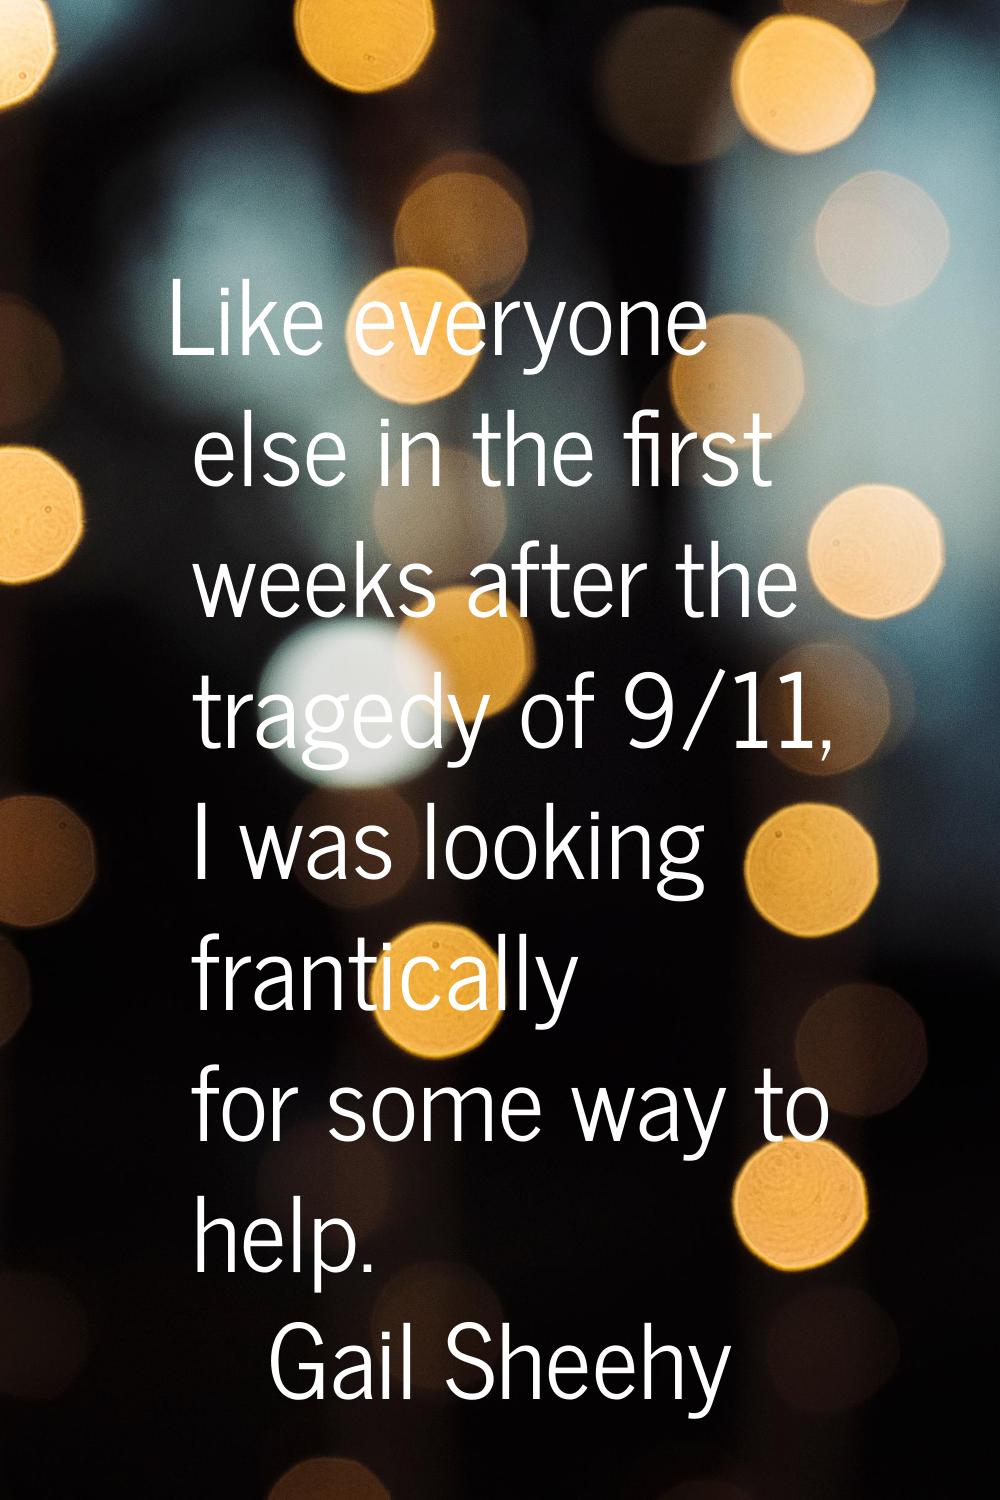 Like everyone else in the first weeks after the tragedy of 9/11, I was looking frantically for some